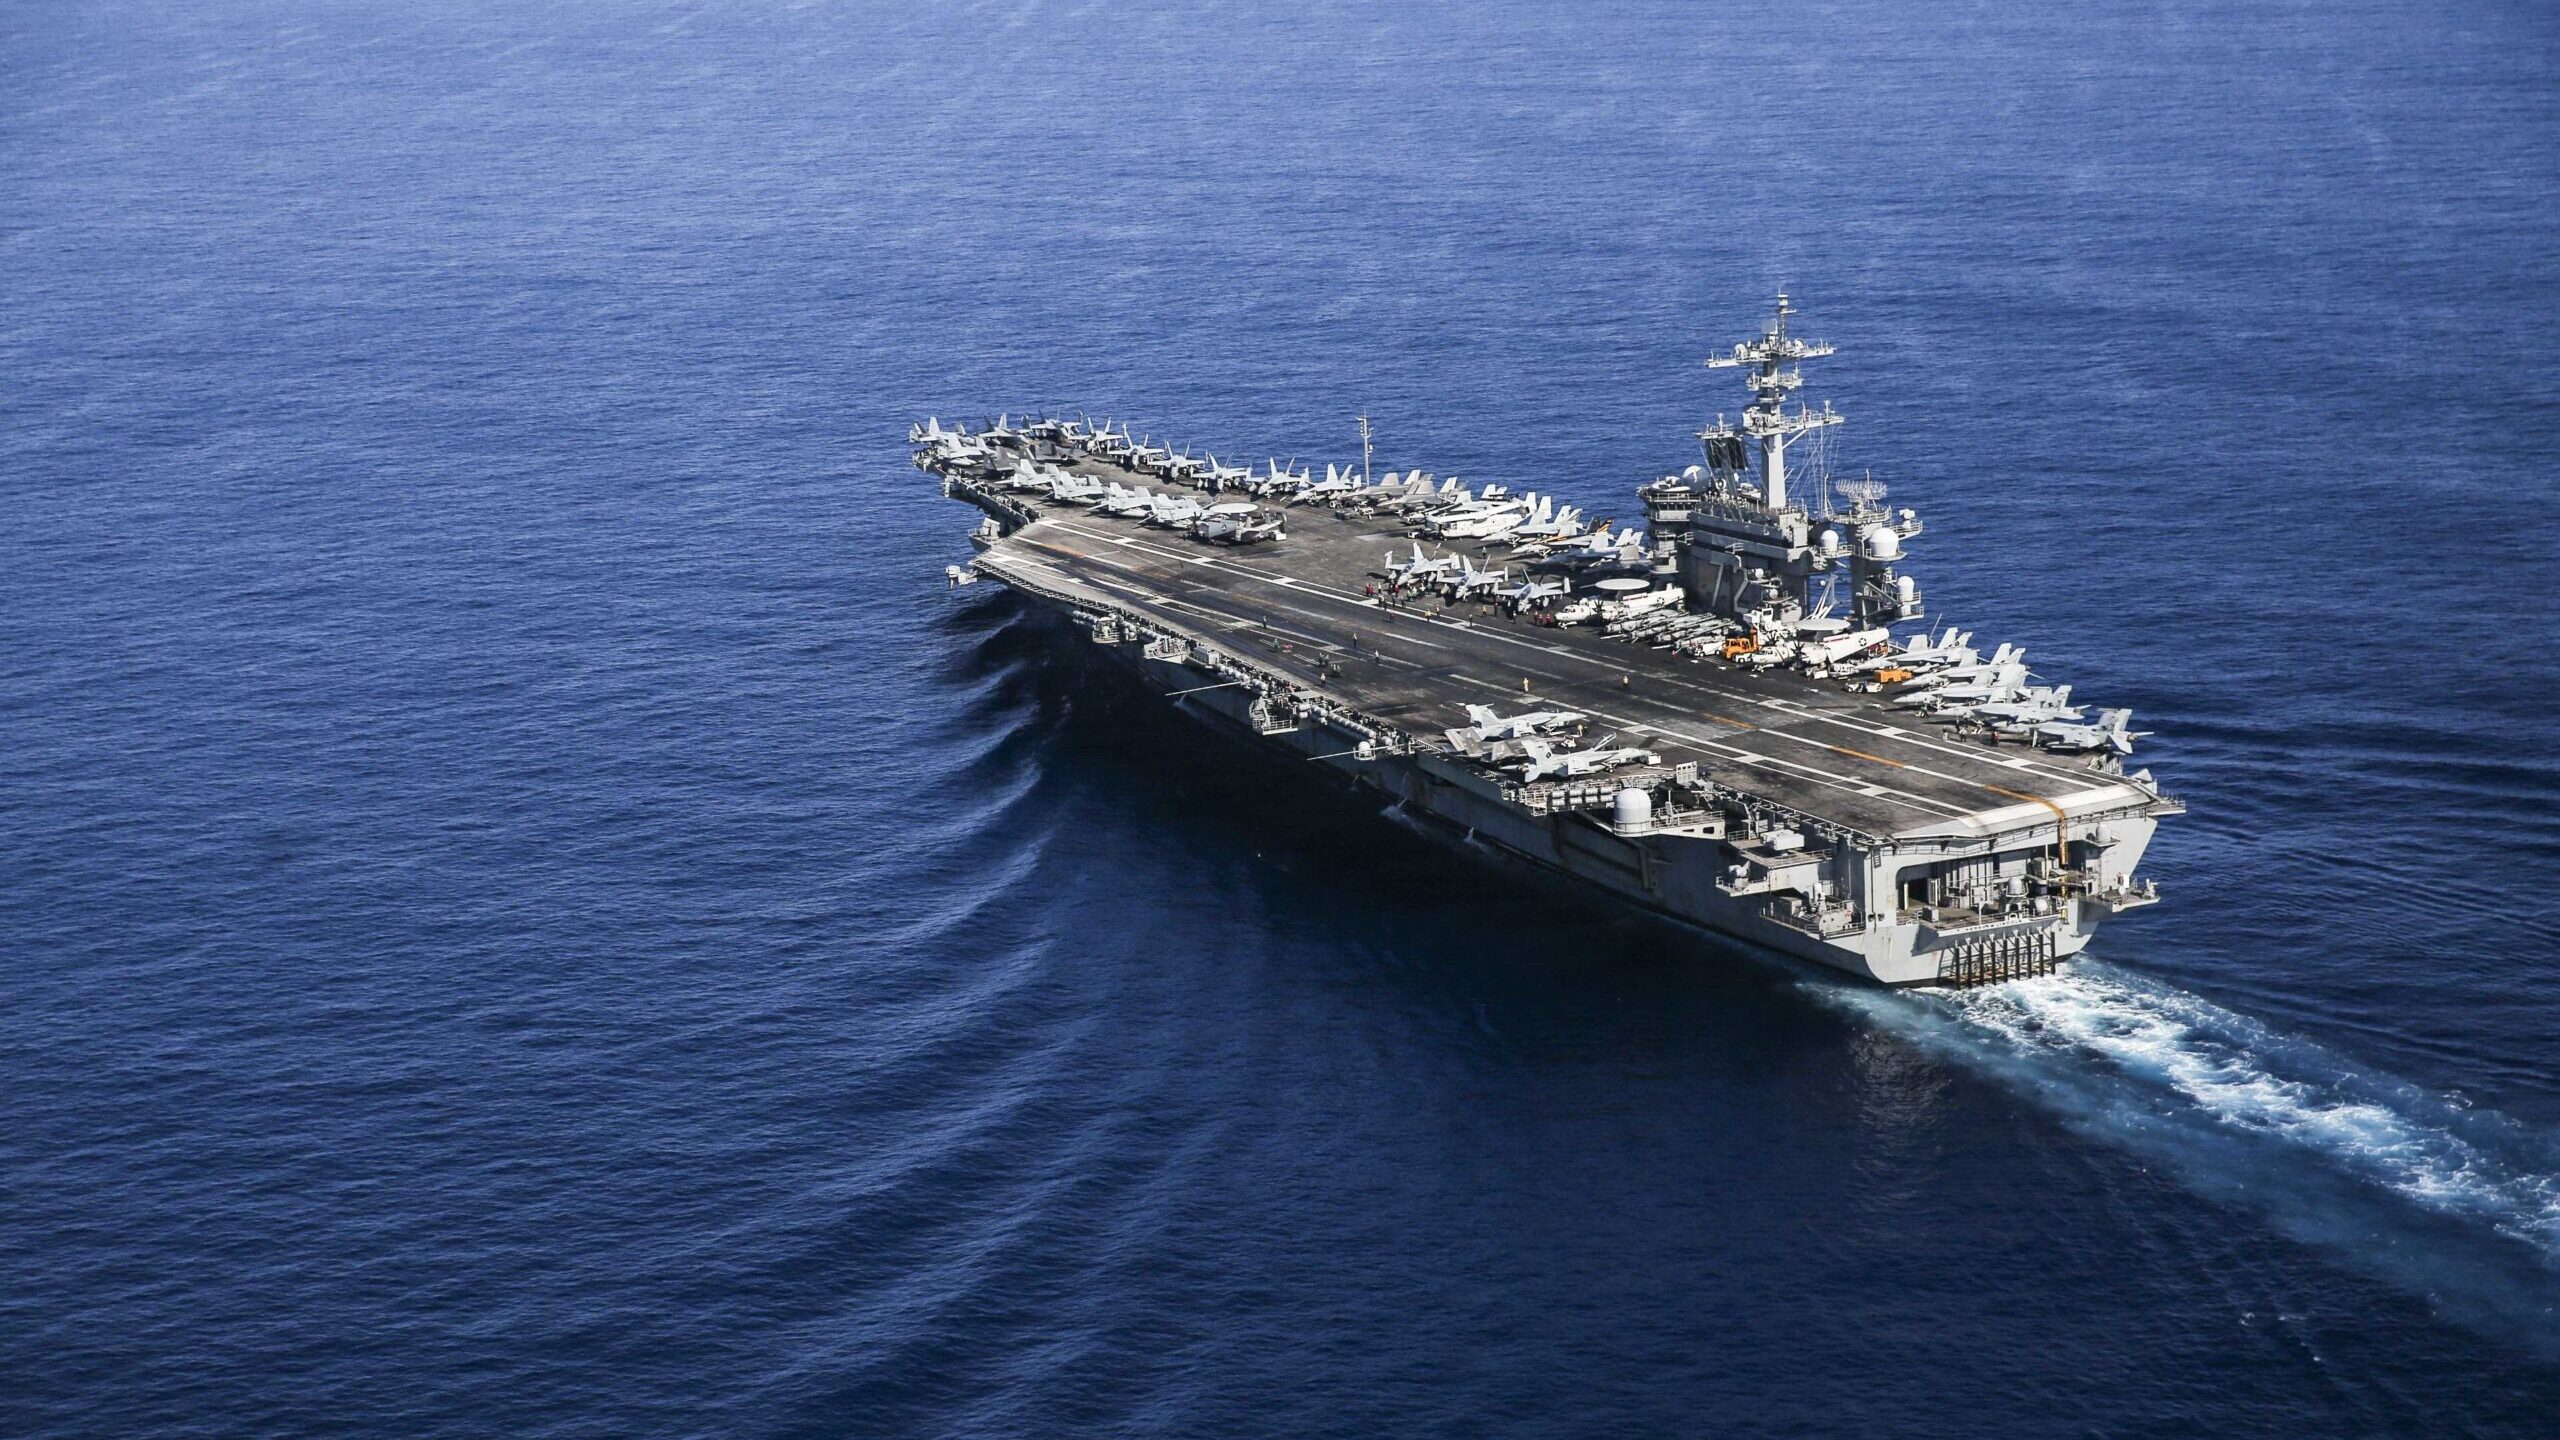 US Indo-Pacific Command seeks .3 billion in new, independent budget request - Breaking Defense